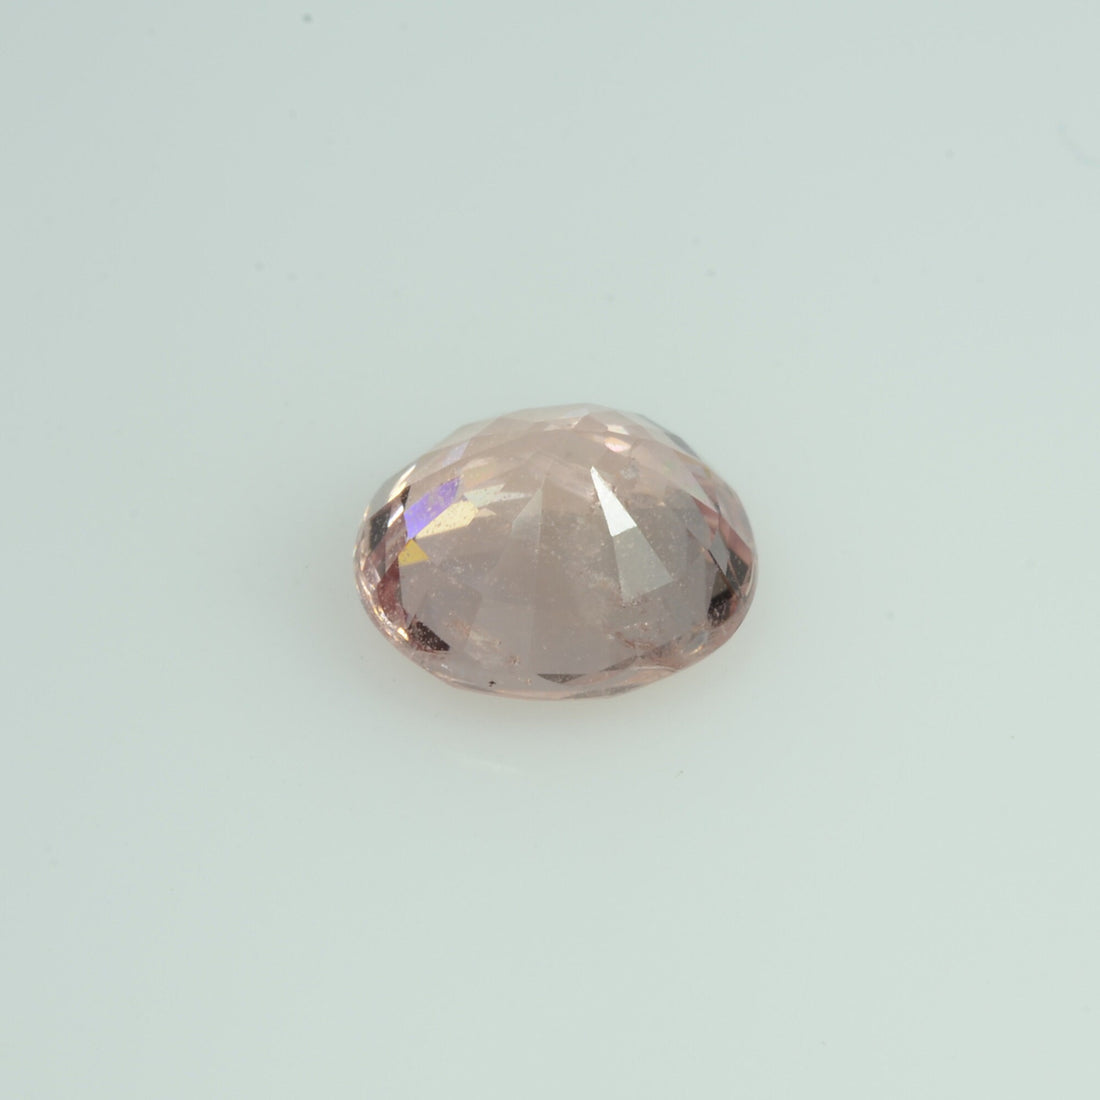 2.09 cts Natural Fancy Peach Sapphire Loose Gemstone oval Cut